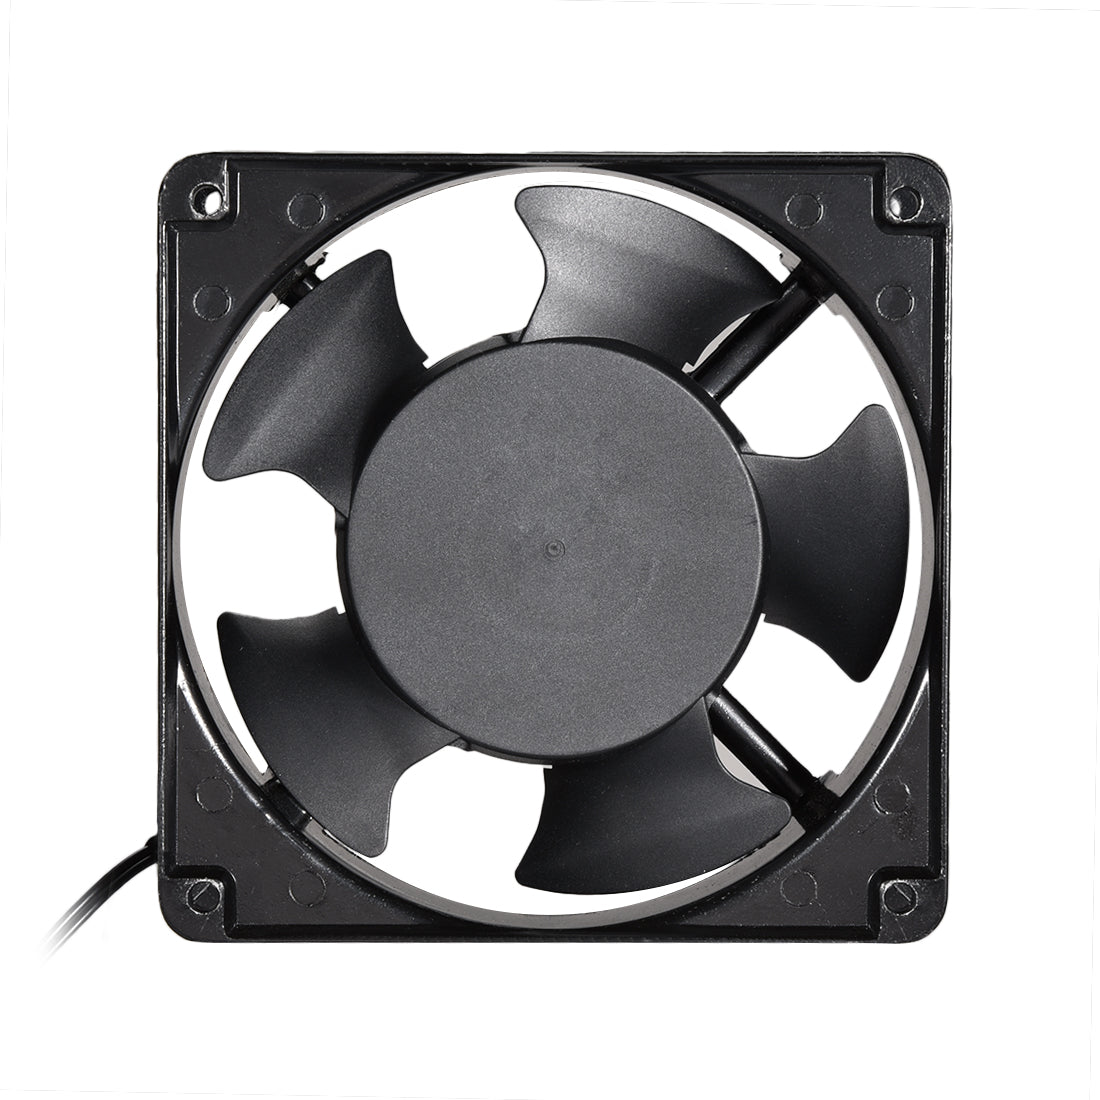 uxcell Uxcell Cooling Fan 120mm x 120mm x 38mm DP200A AC 220-240V 0.14A Dual Ball Bearings